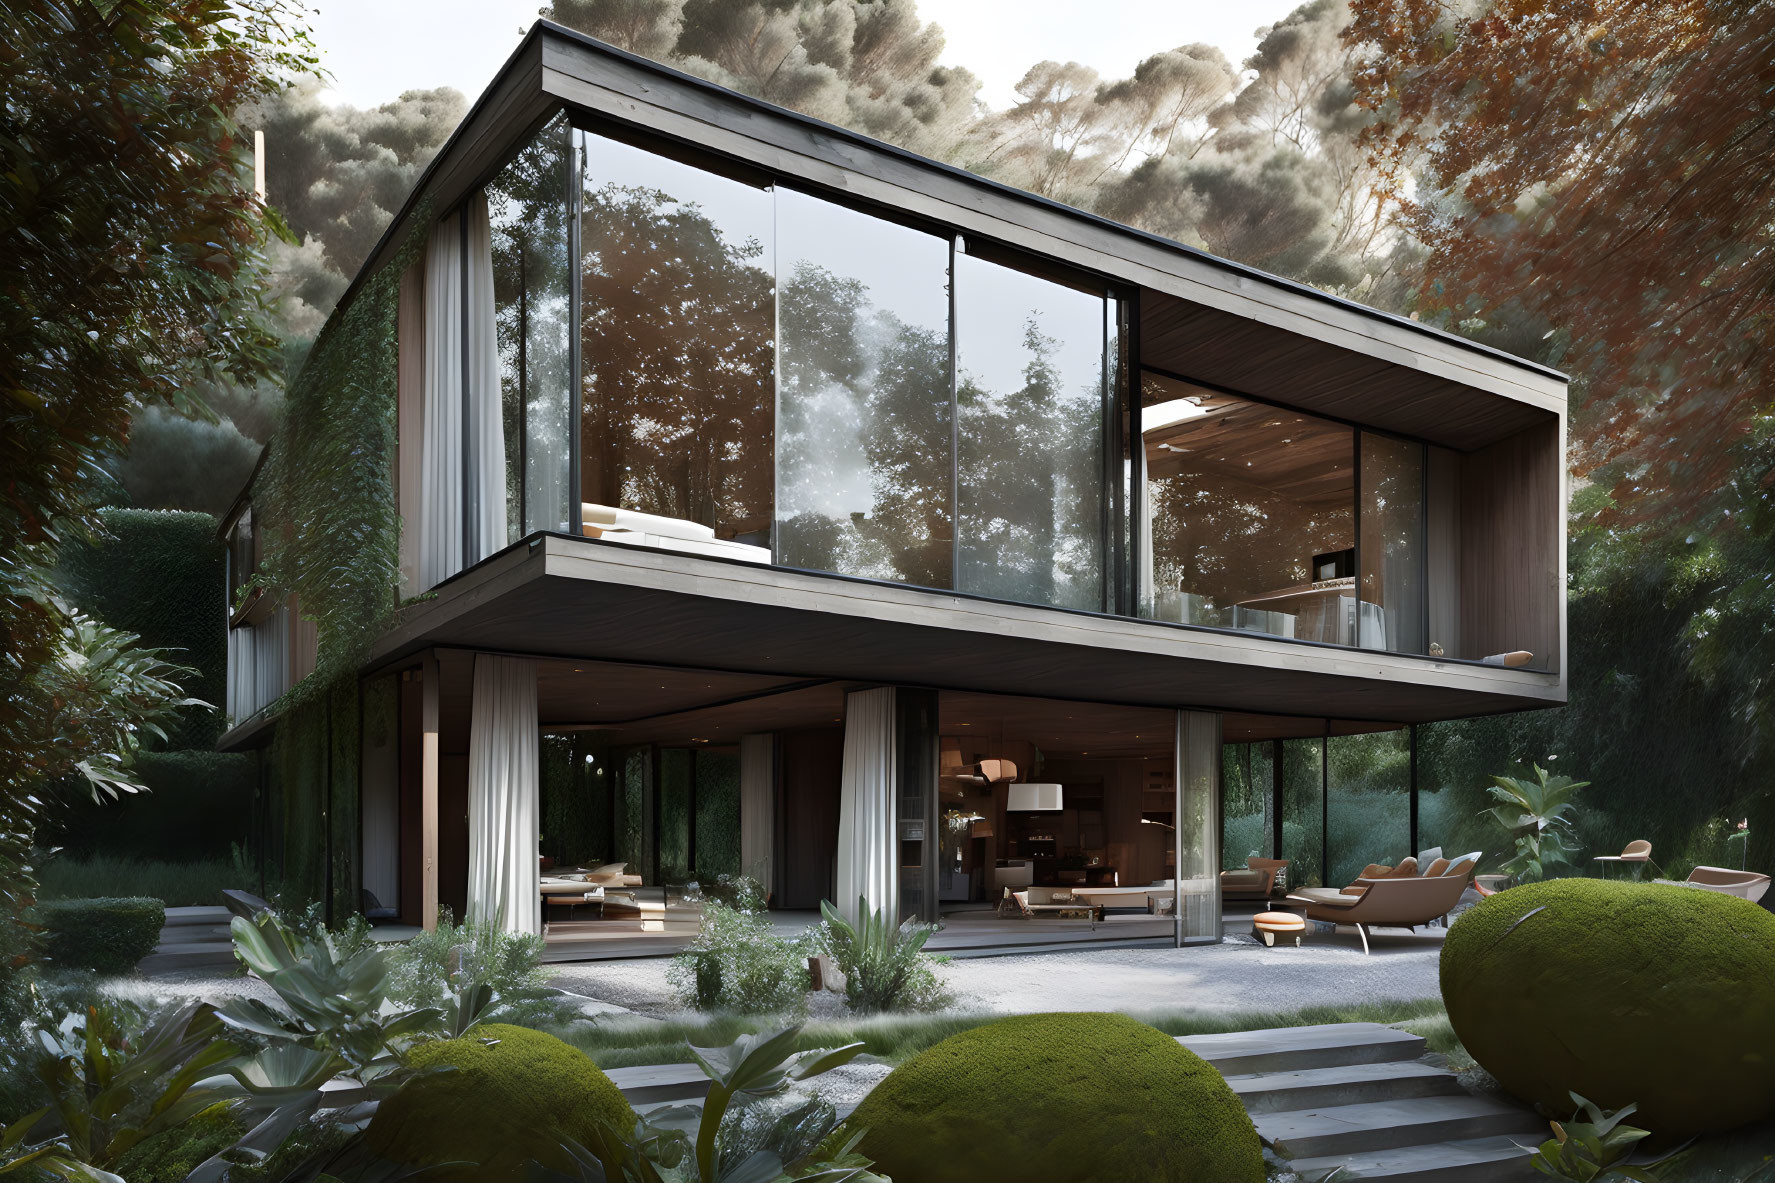 Modern Glass House with Wooden Panels in Lush Greenery